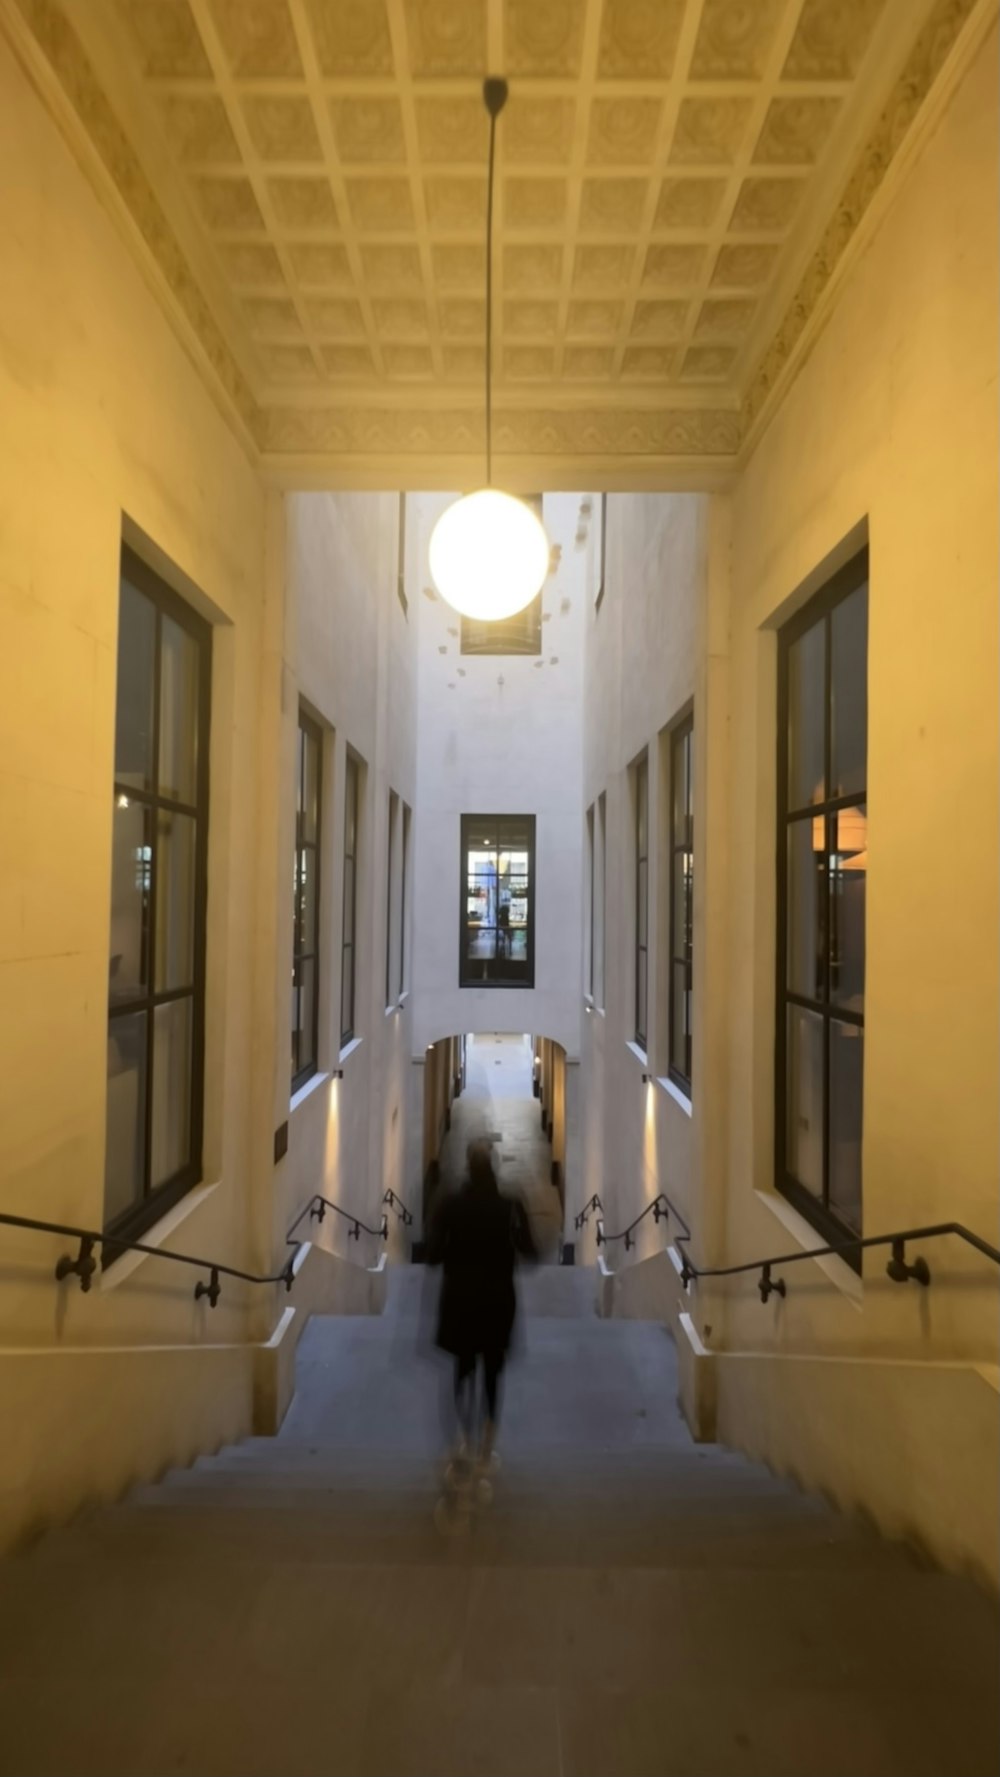 a person walking down a hallway with a light on